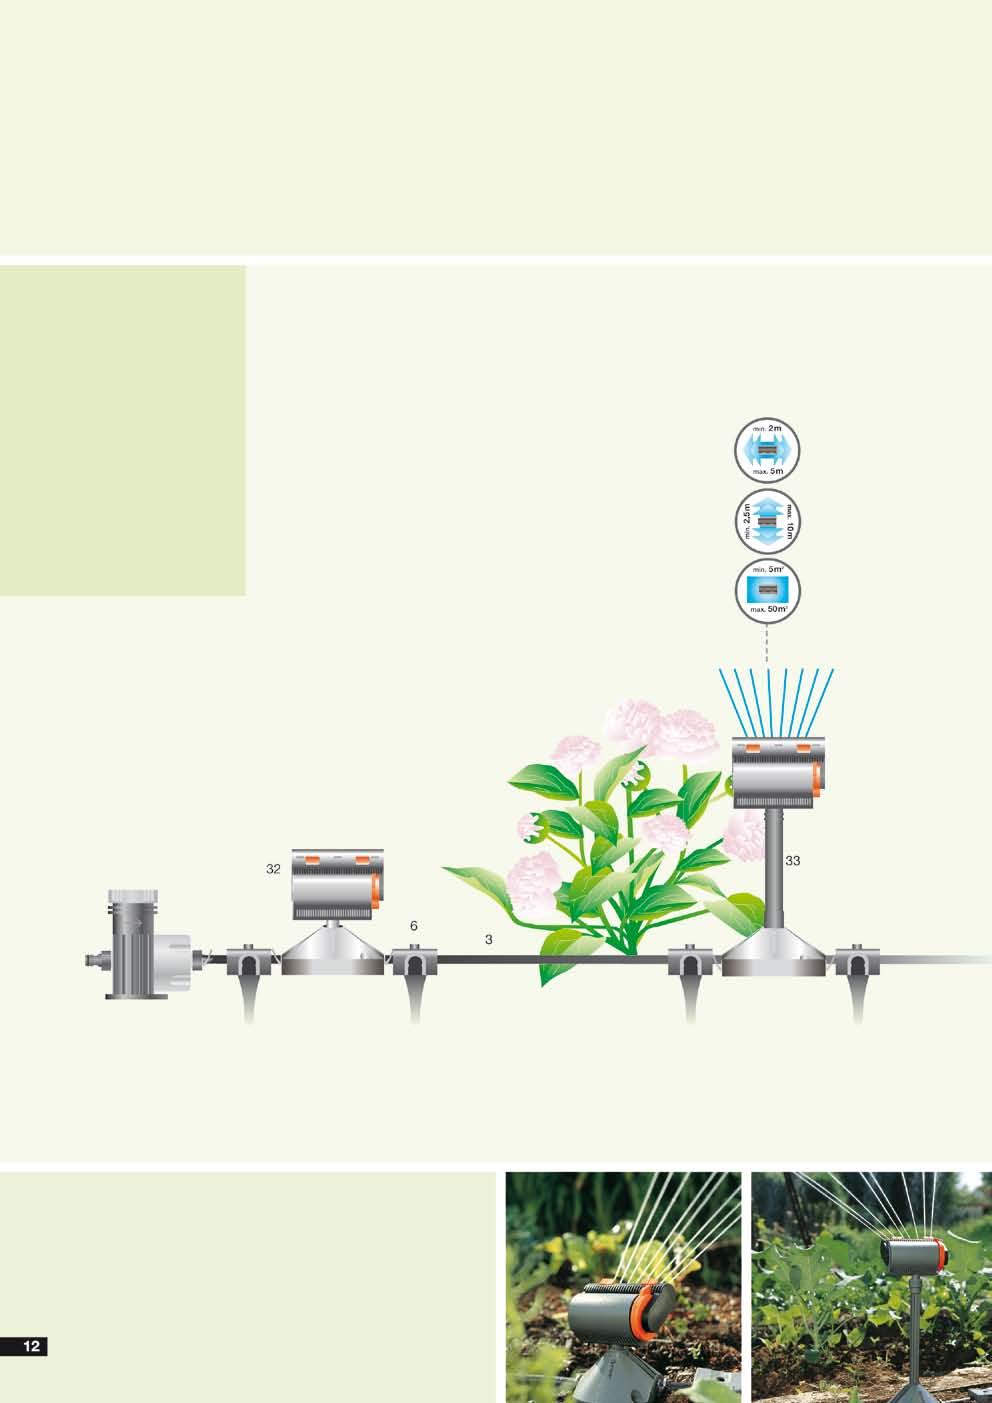 Extremely versatile Watering tip: We recommend watering your garden for a prolonged period once to twice a week. This will ensure that water penetrates the soil to the deeper roots of your plants.